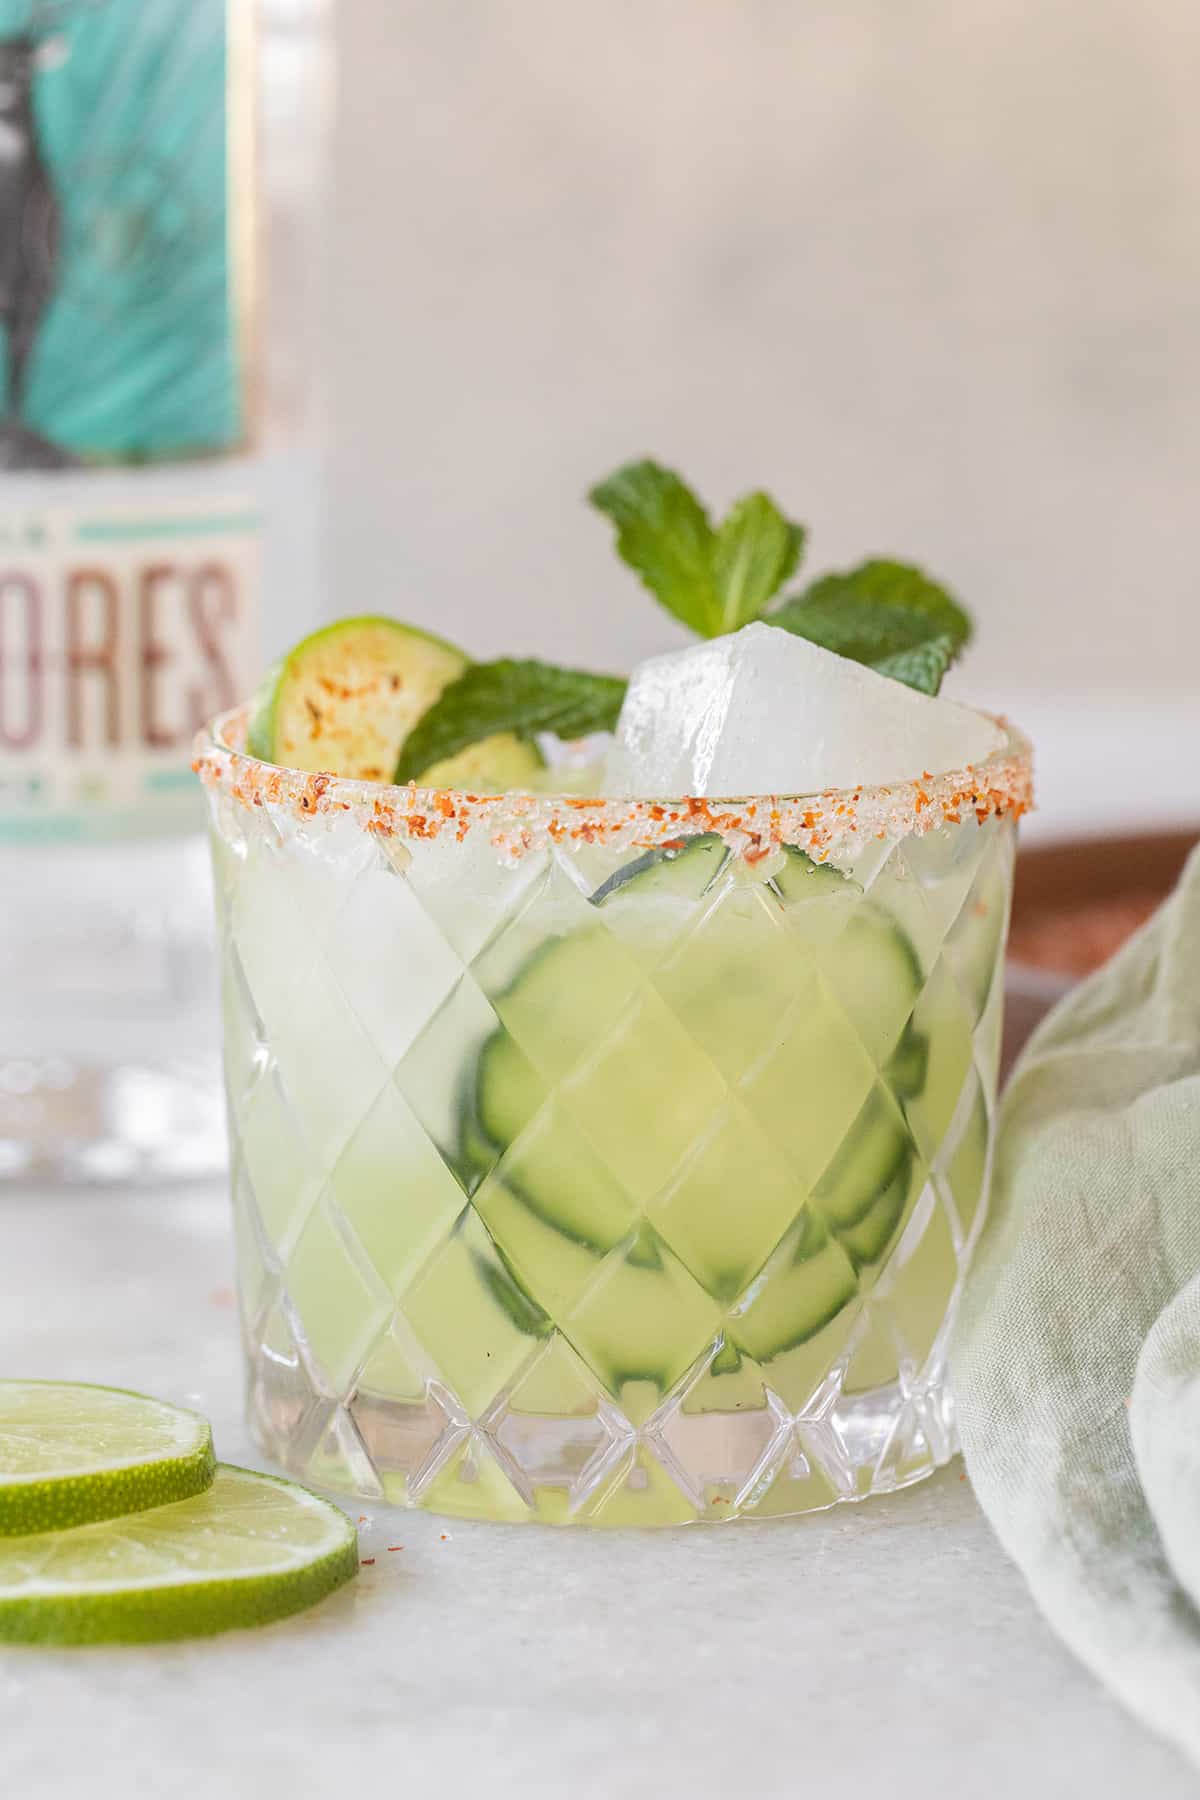 Cucumber margarita with cucumber slices and fresh mint.